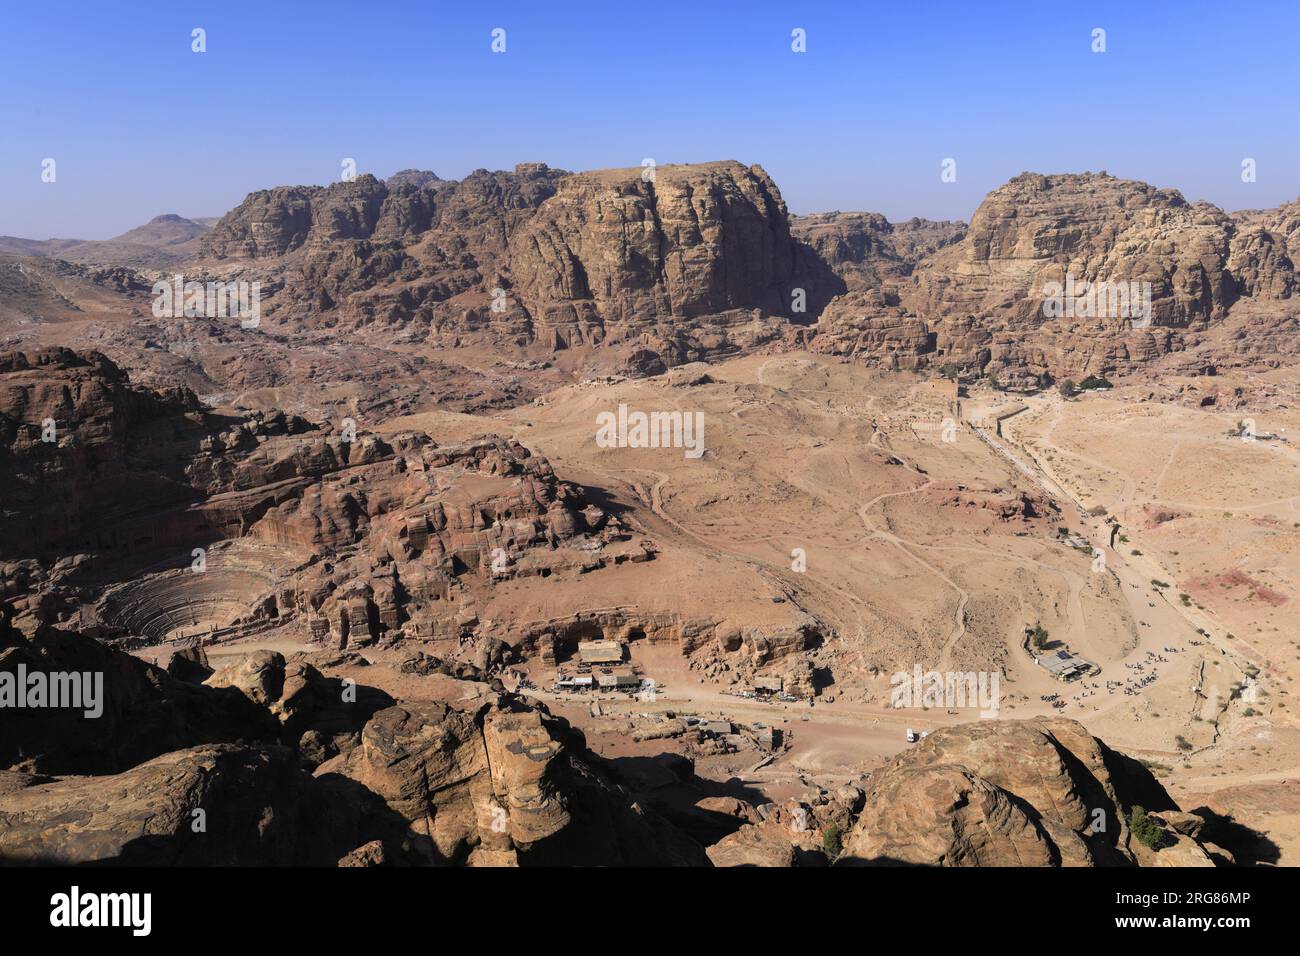 High overview of Petra city, UNESCO World Heritage Site, Wadi Musa, Jordan, Middle East Stock Photo